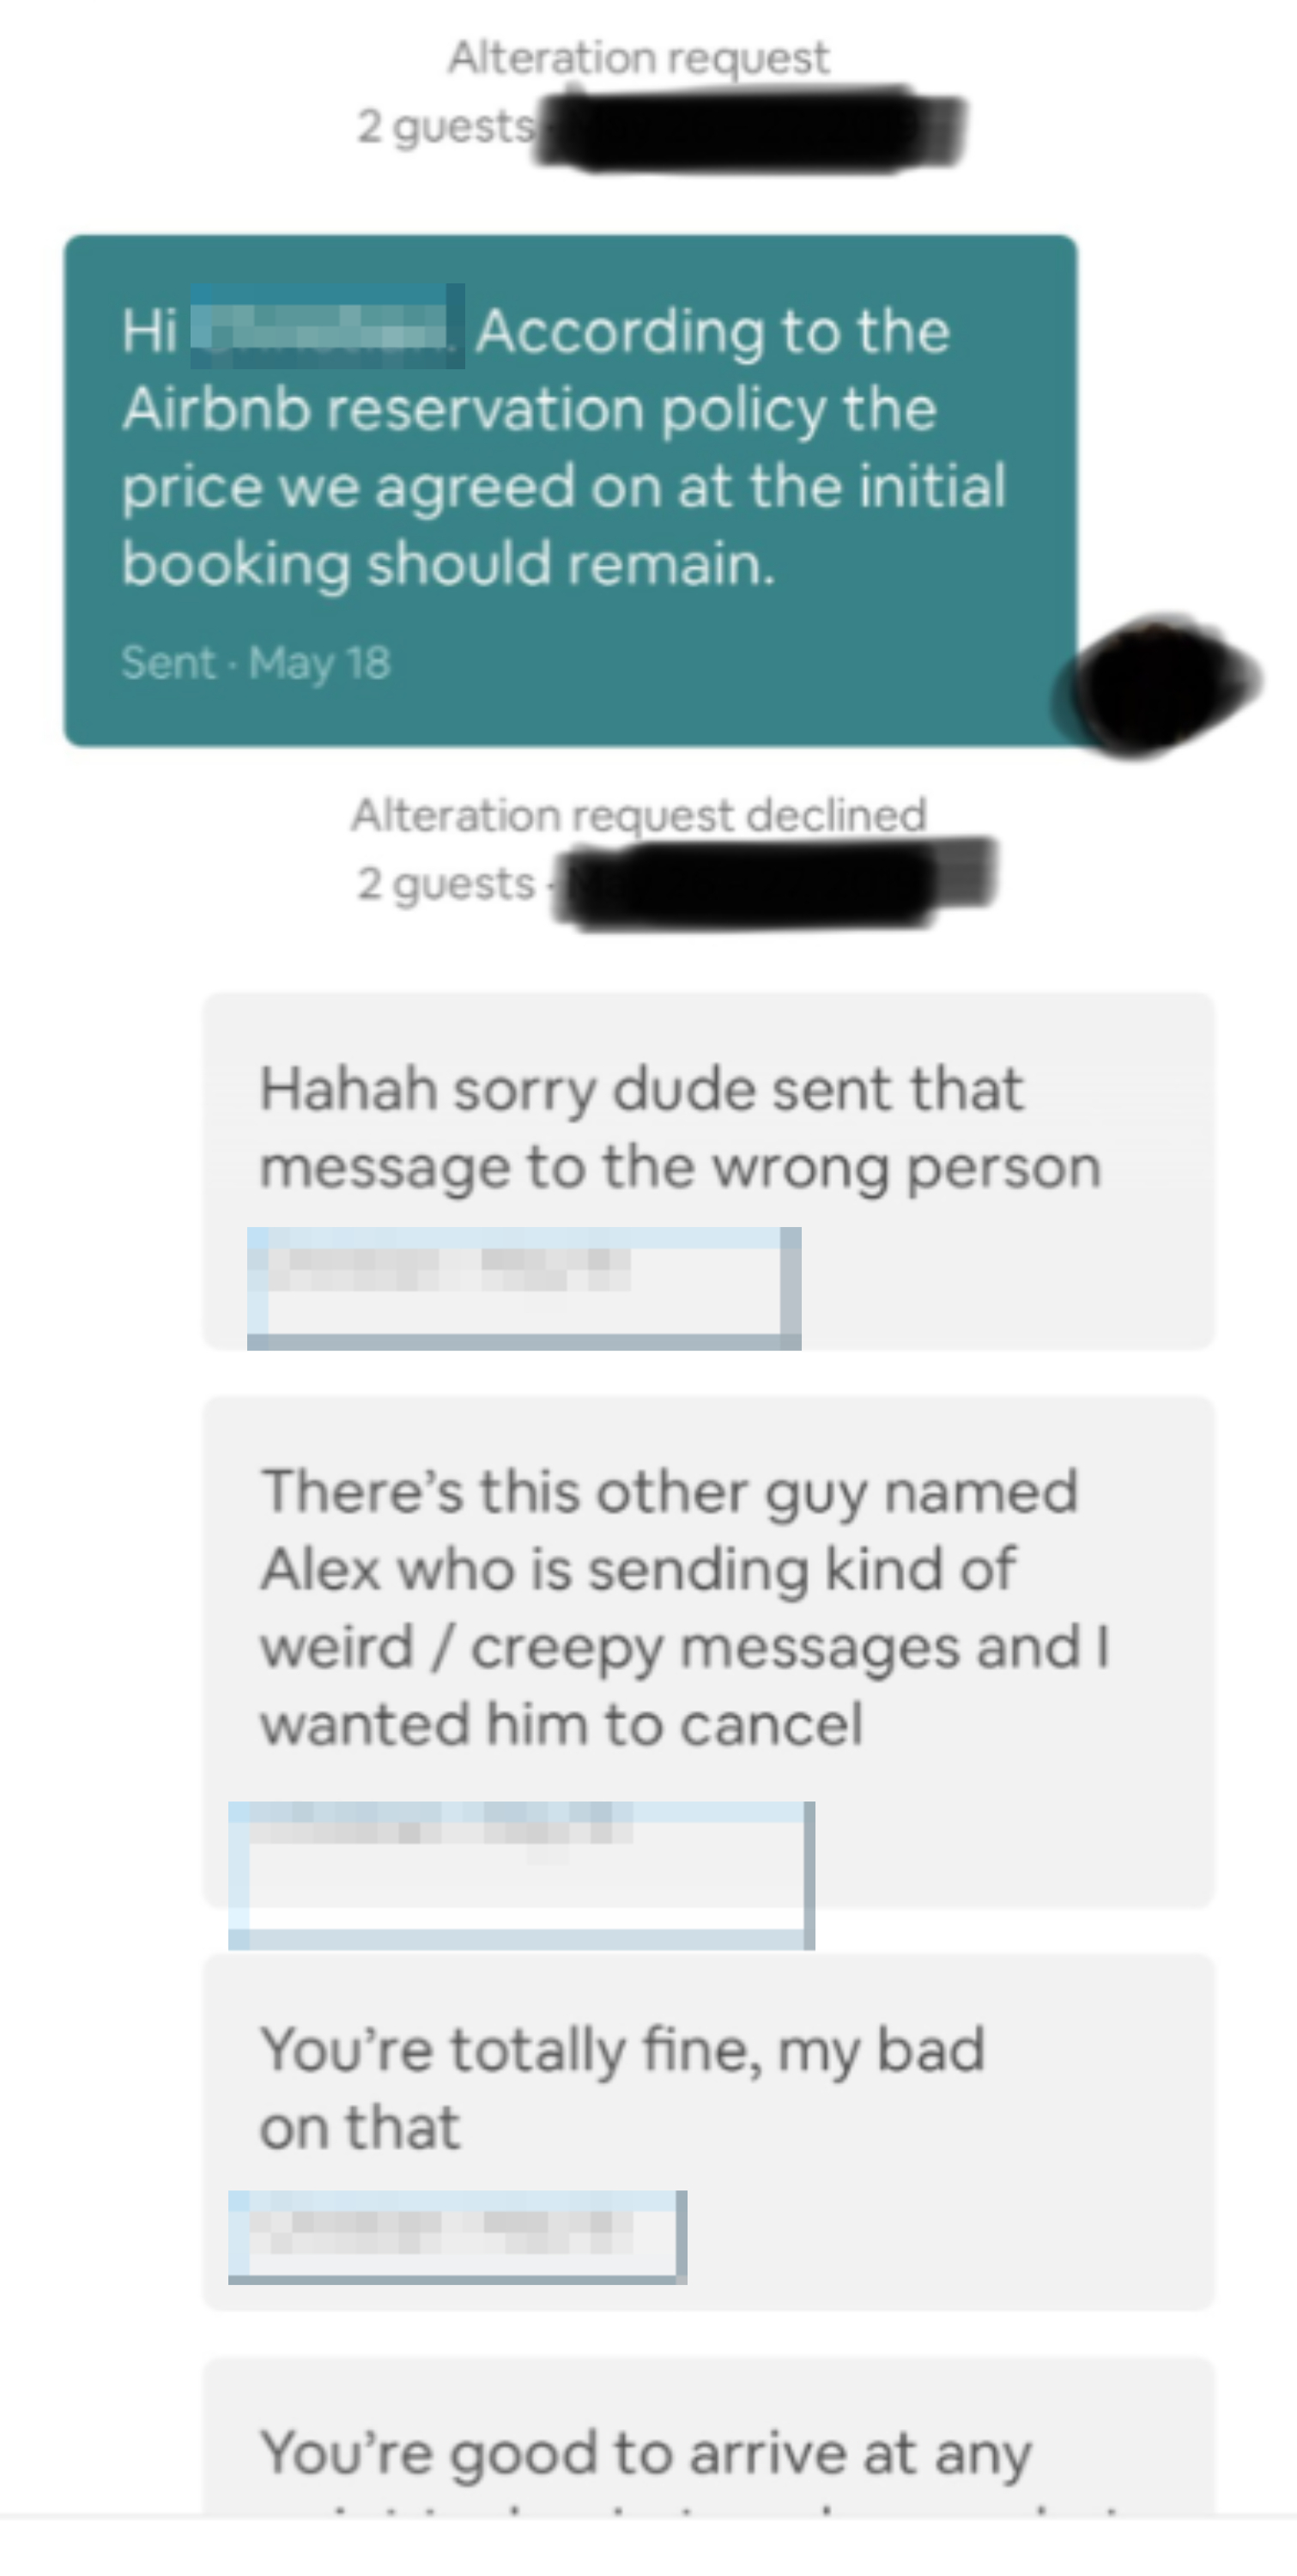 Screenshot of a text conversation discussing an Airbnb reservation price and a mix-up in message recipients, featuring texts from Christian and another person